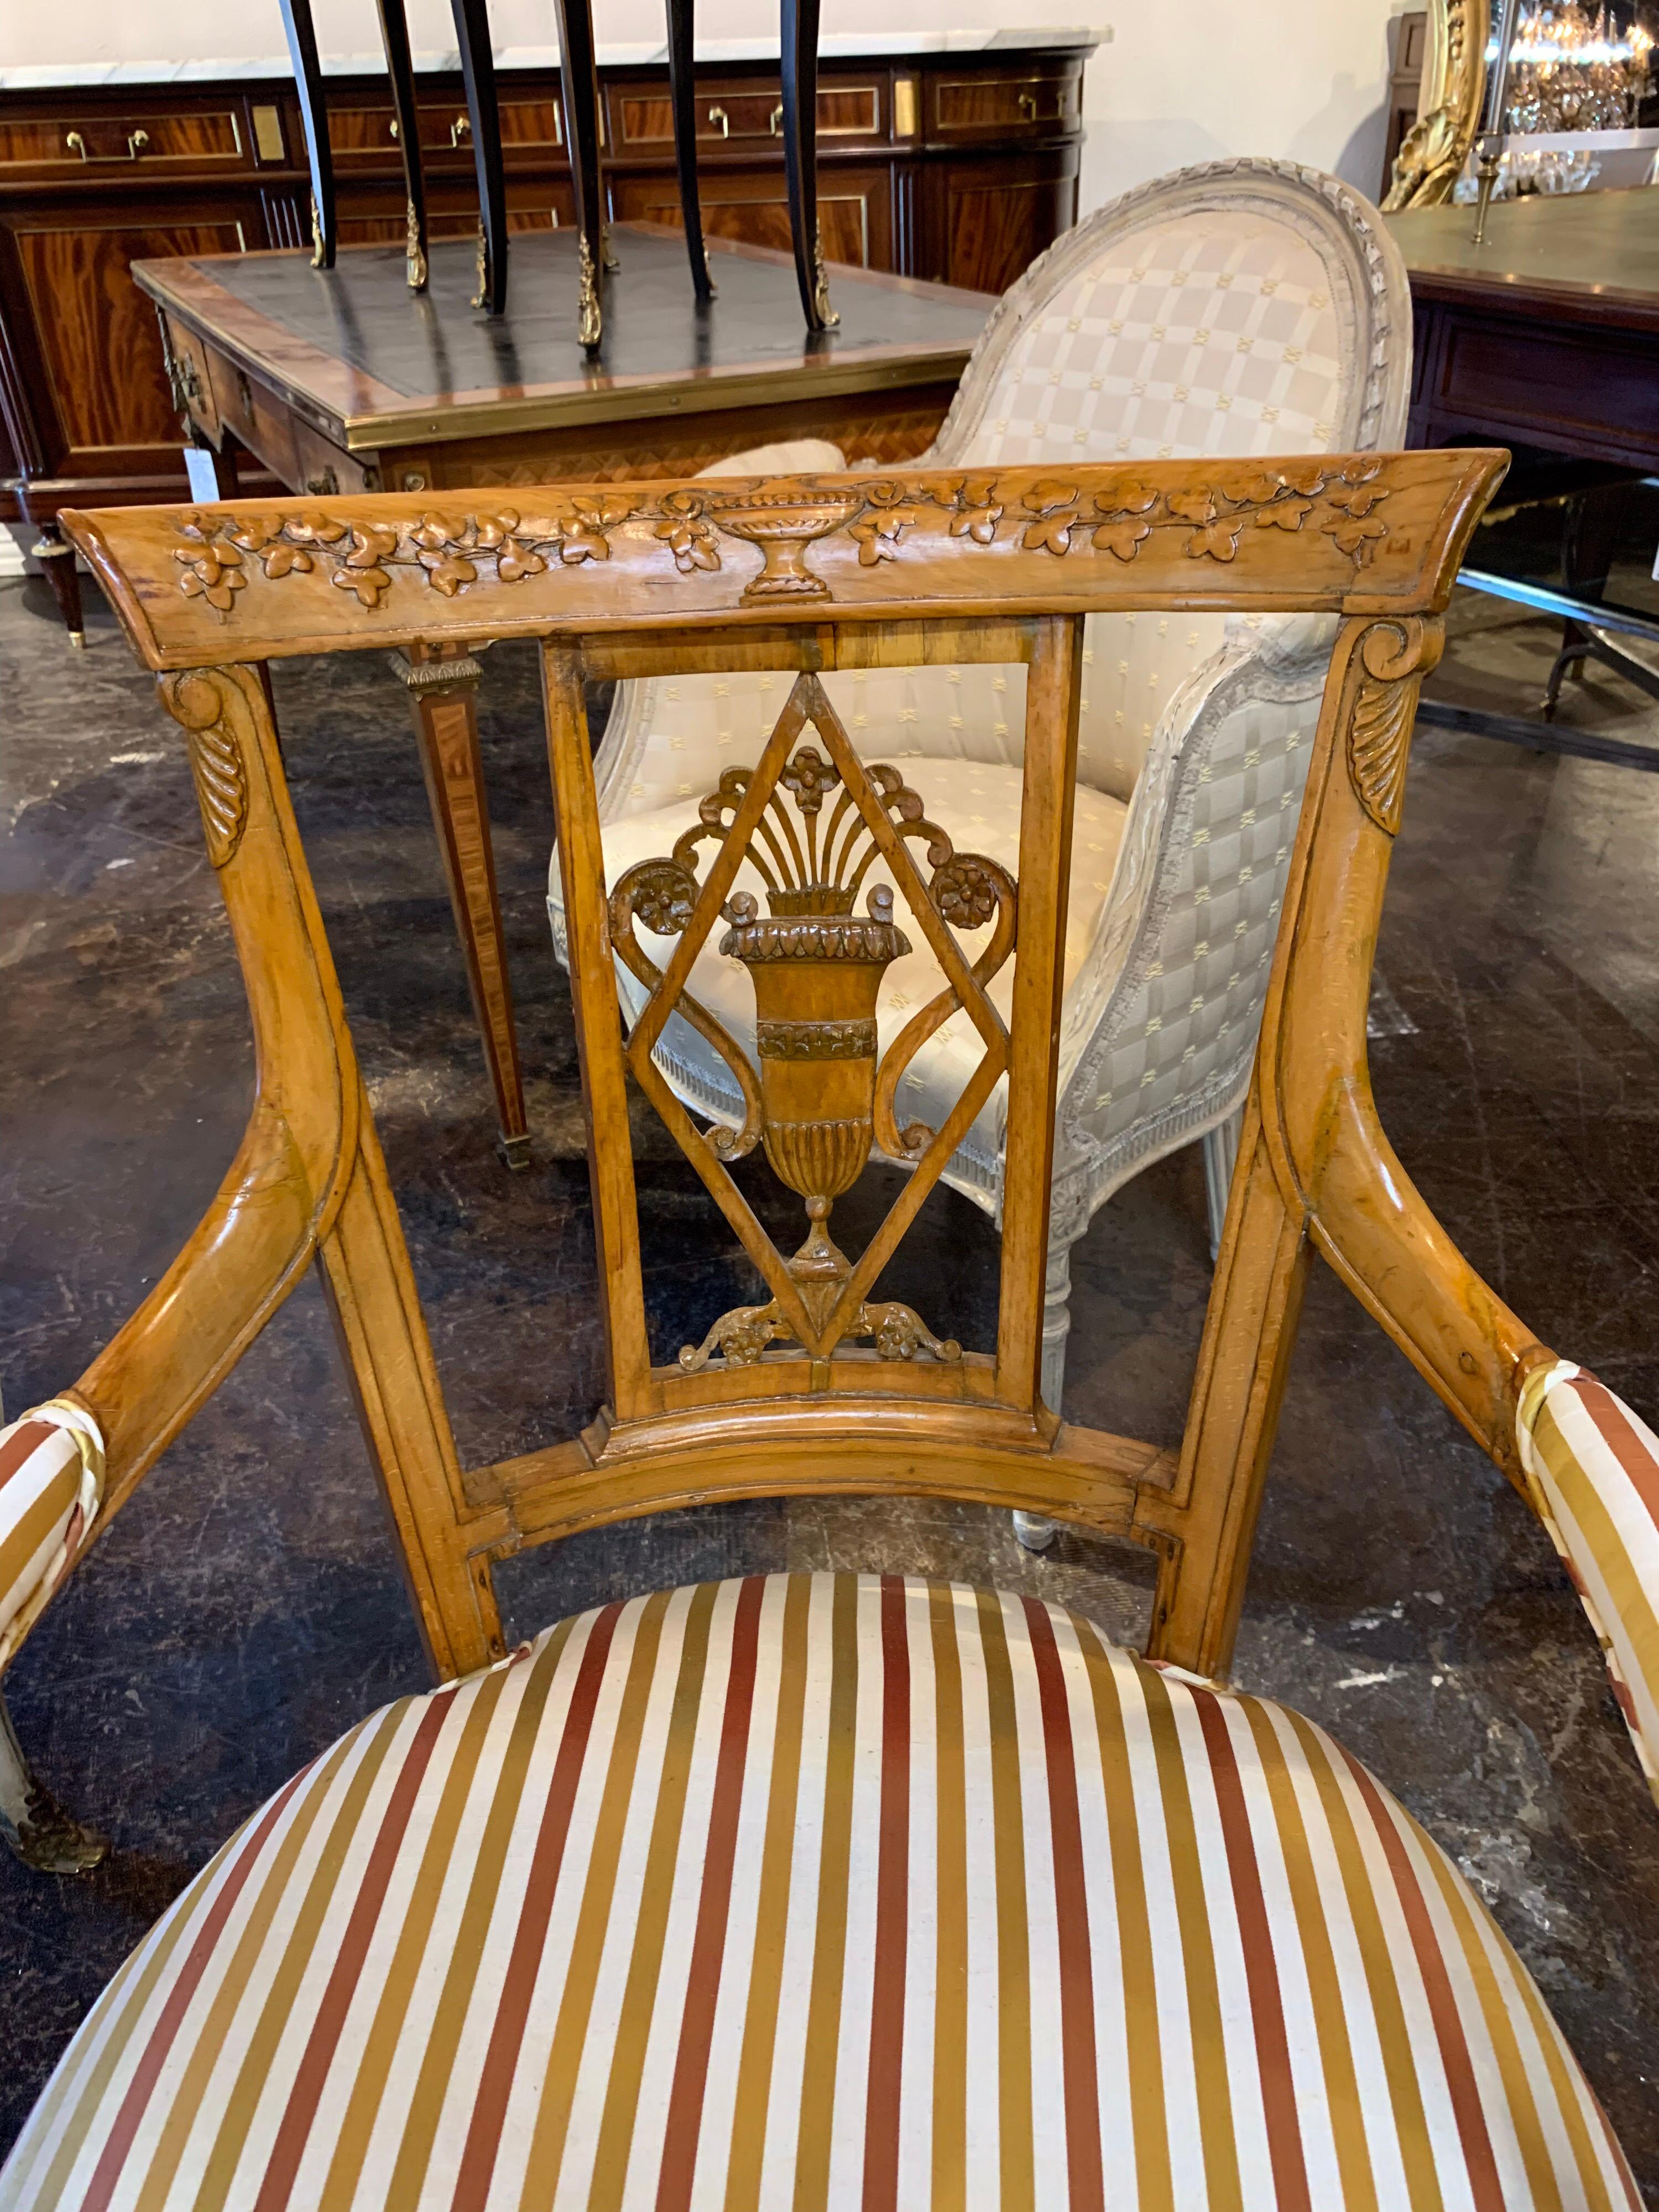 Beautiful pair of carved fruitwood armchairs from England in the neoclassical style. The carvings have an urn with overflowing flowers and vines. The chairs are upholstered in silk with the colors, crème, copper and gold.